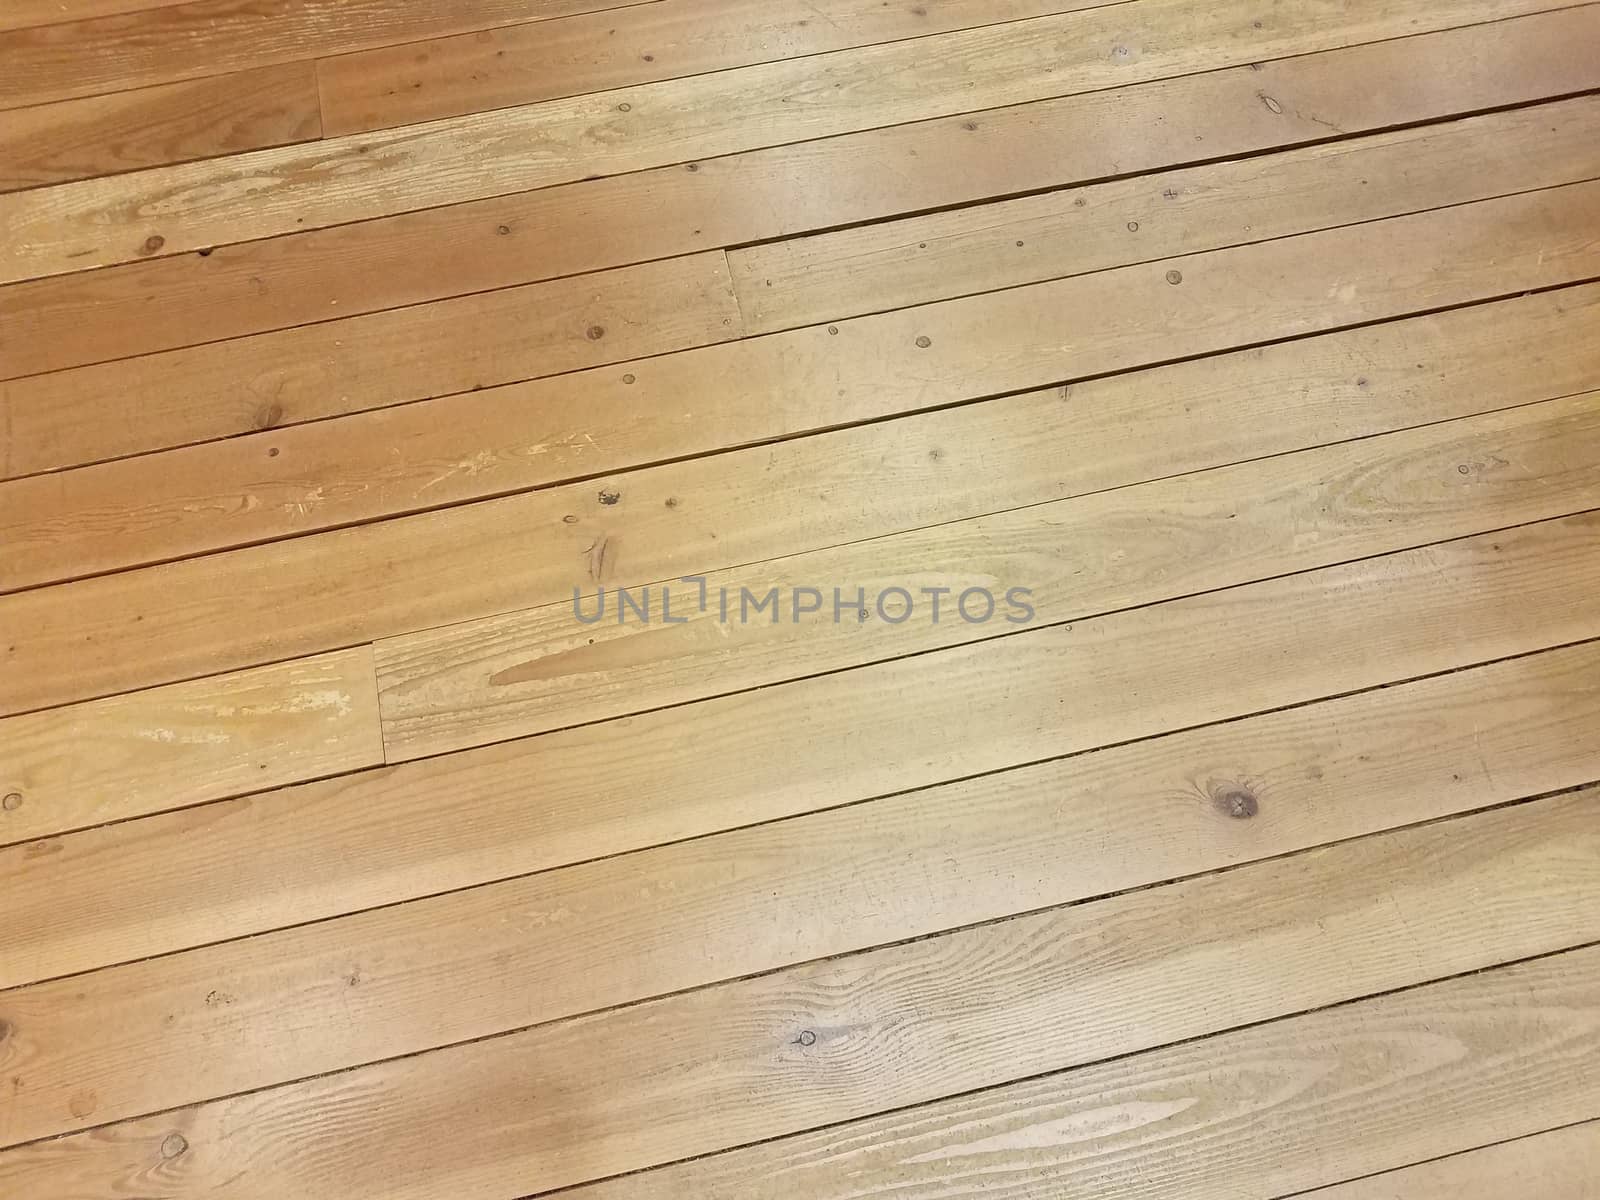 brown wood boards on floor or ground or background